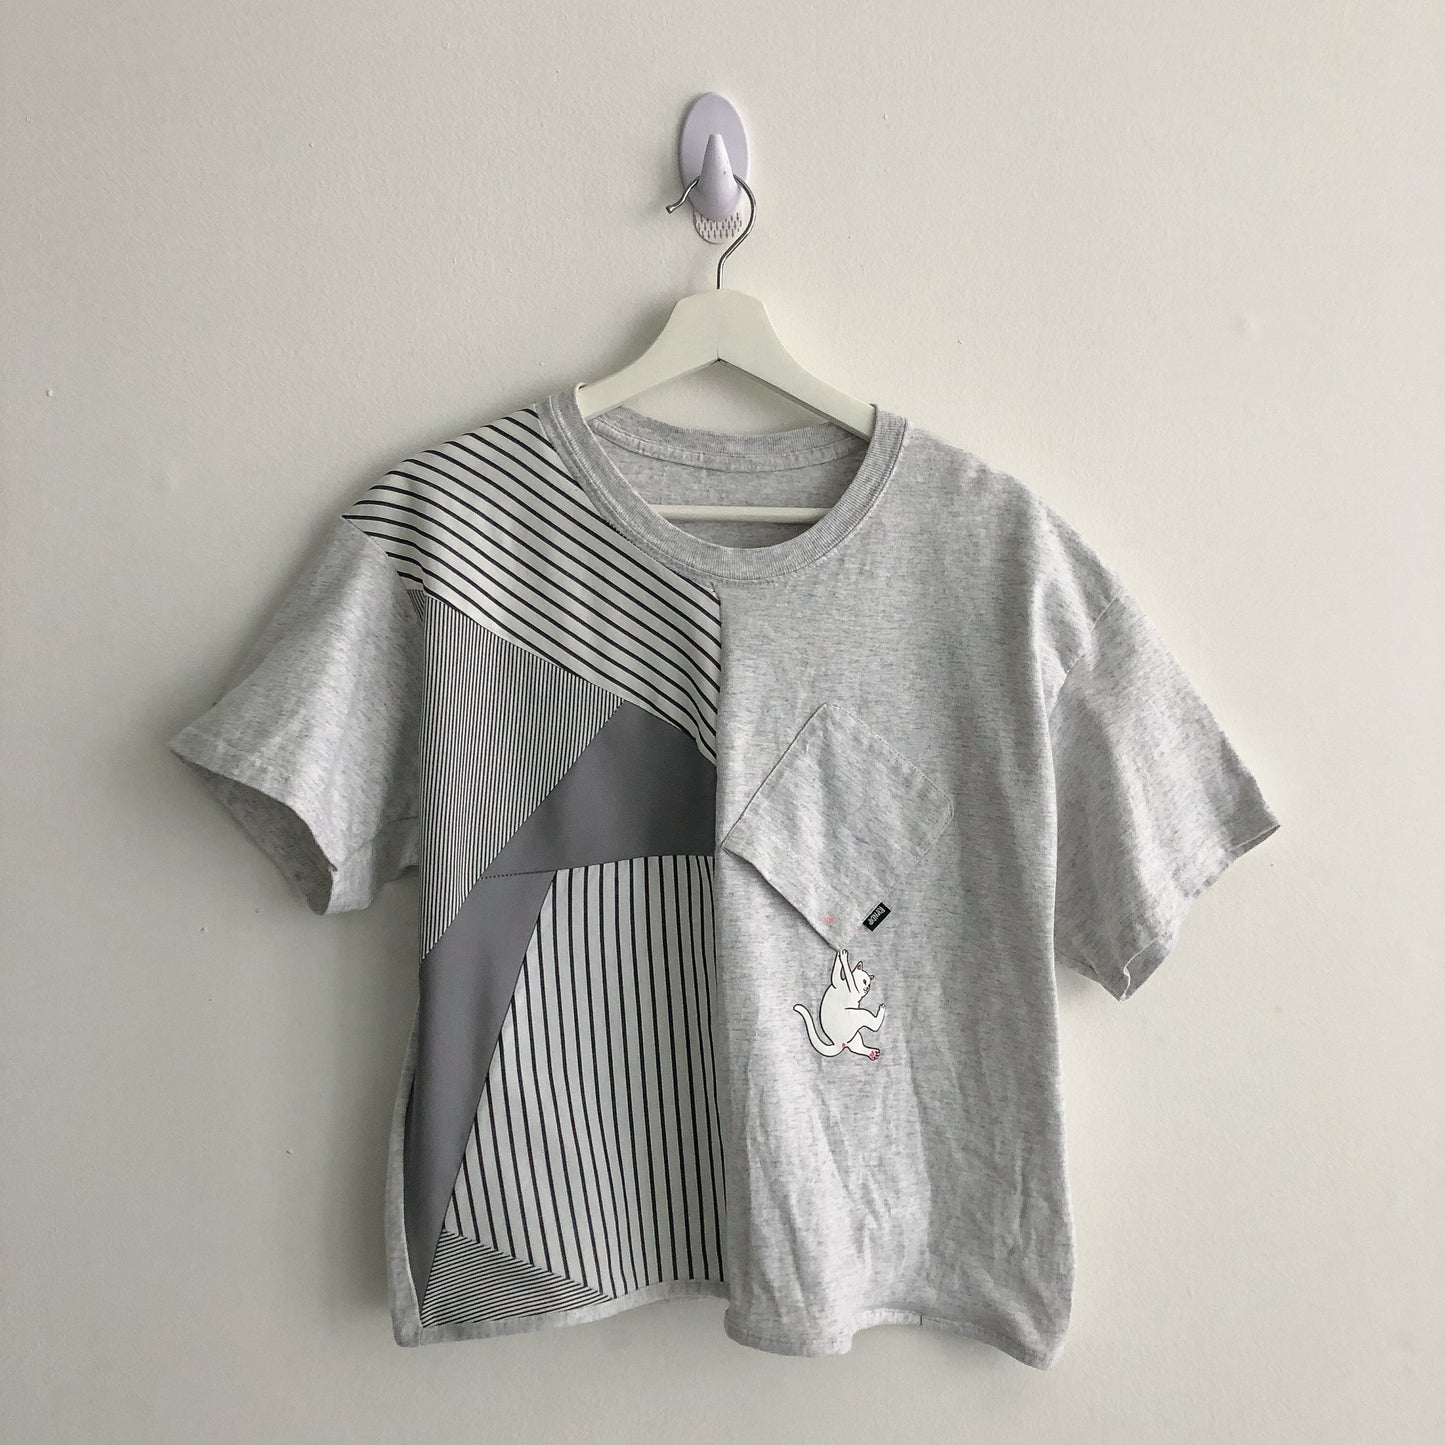 Upcycled Patchwork Adams Tee